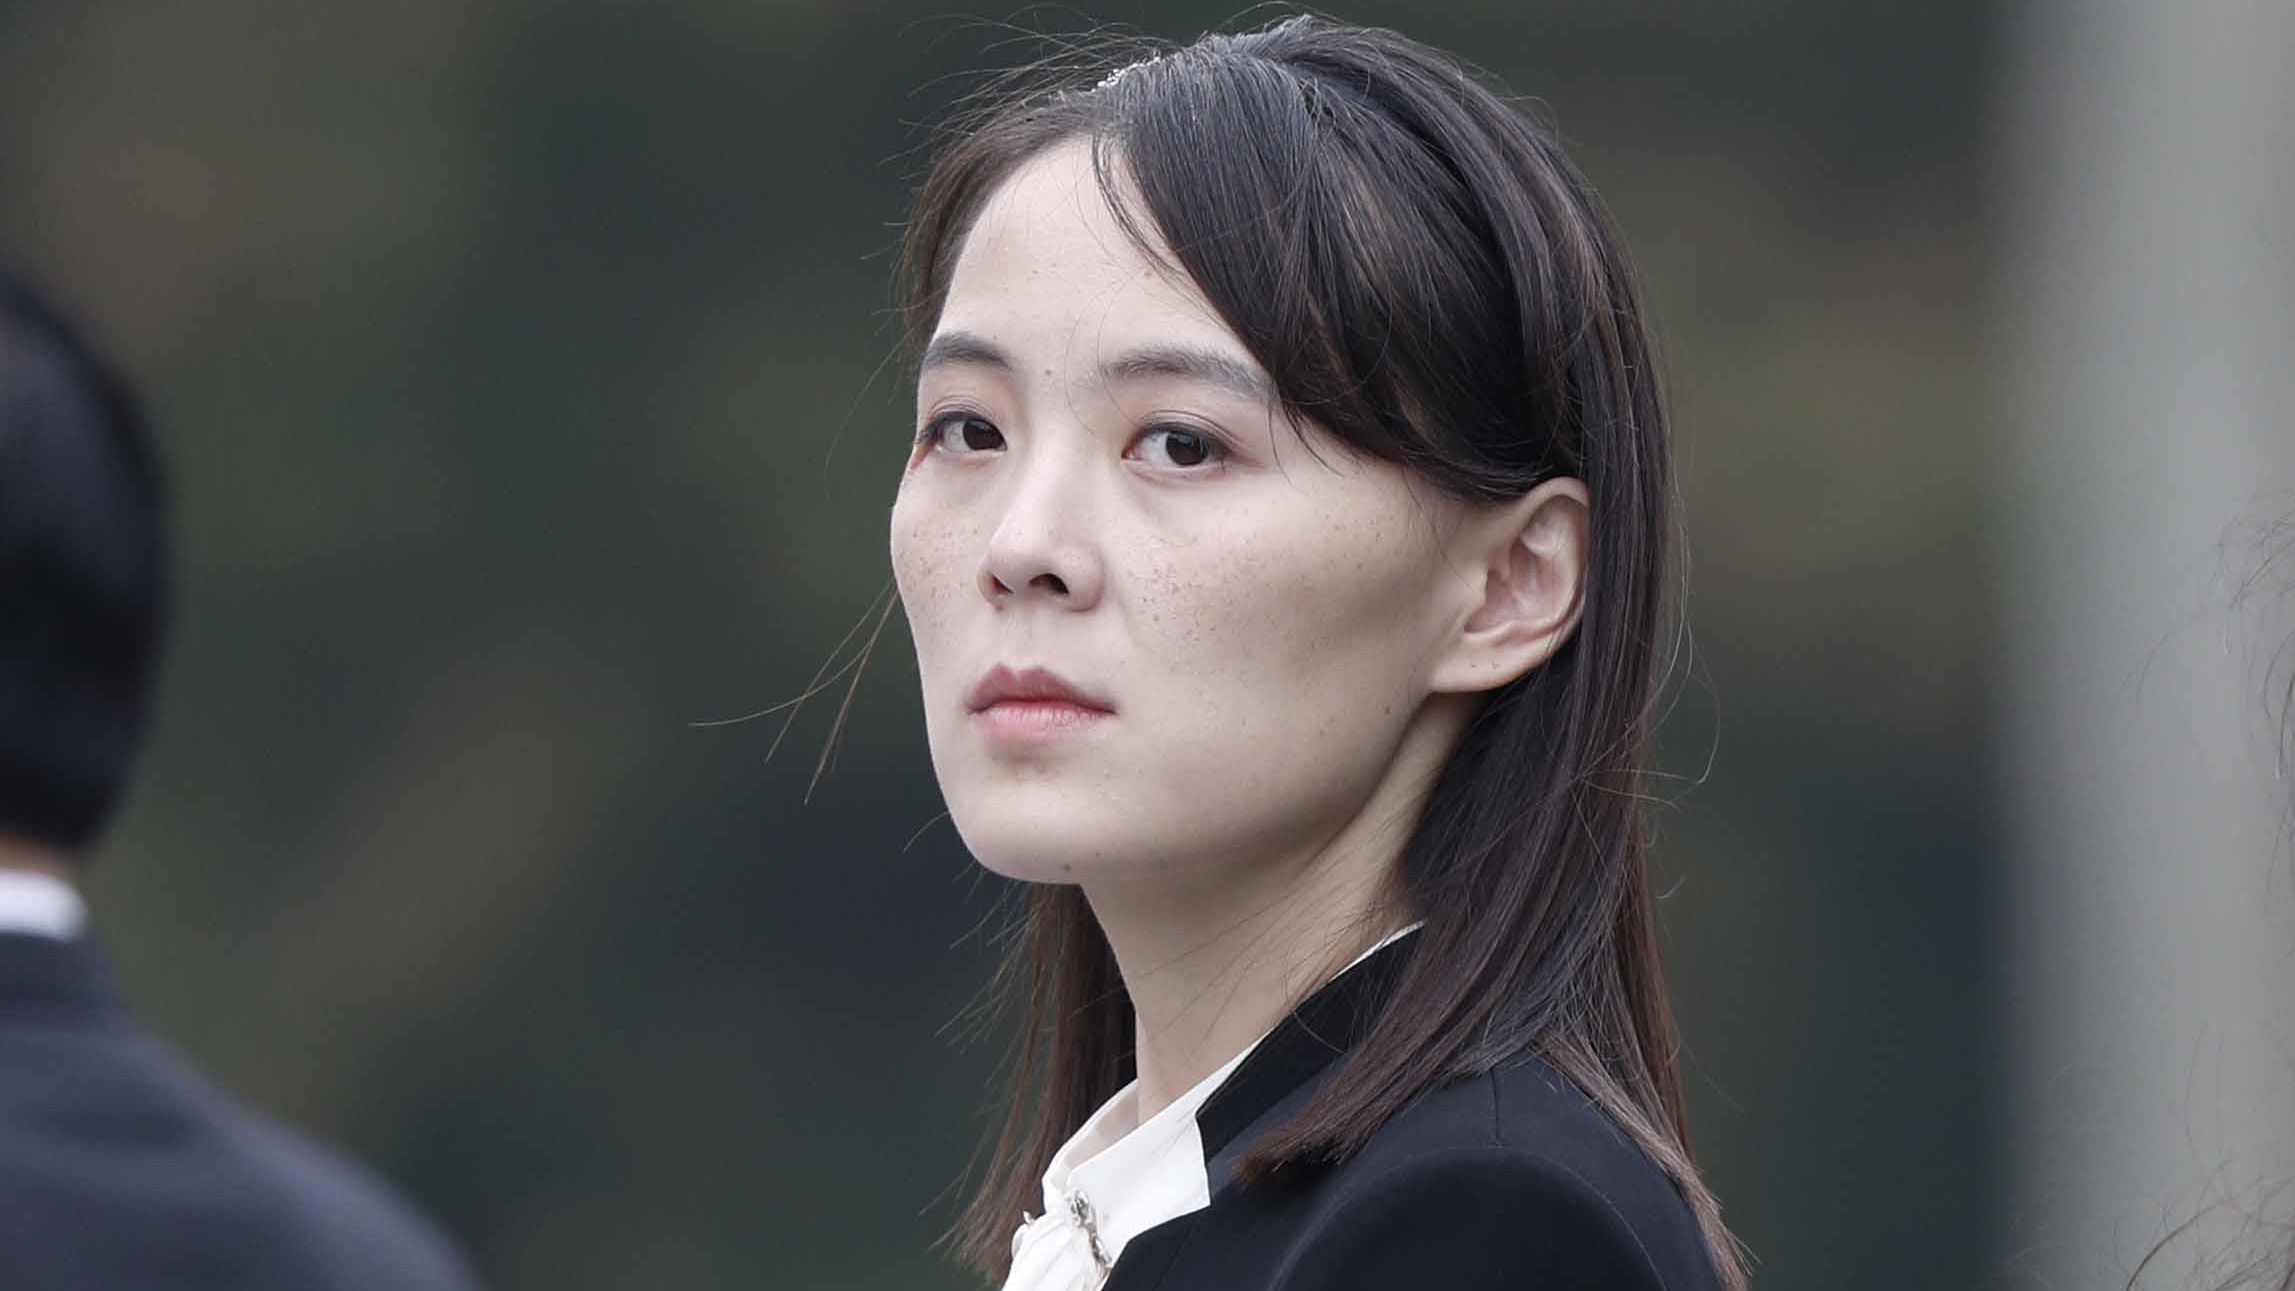 Kim Yo Jong attends wreath laying ceremony at Ho Chi Minh Mausoleum in Hanoi on March 2, 2019.